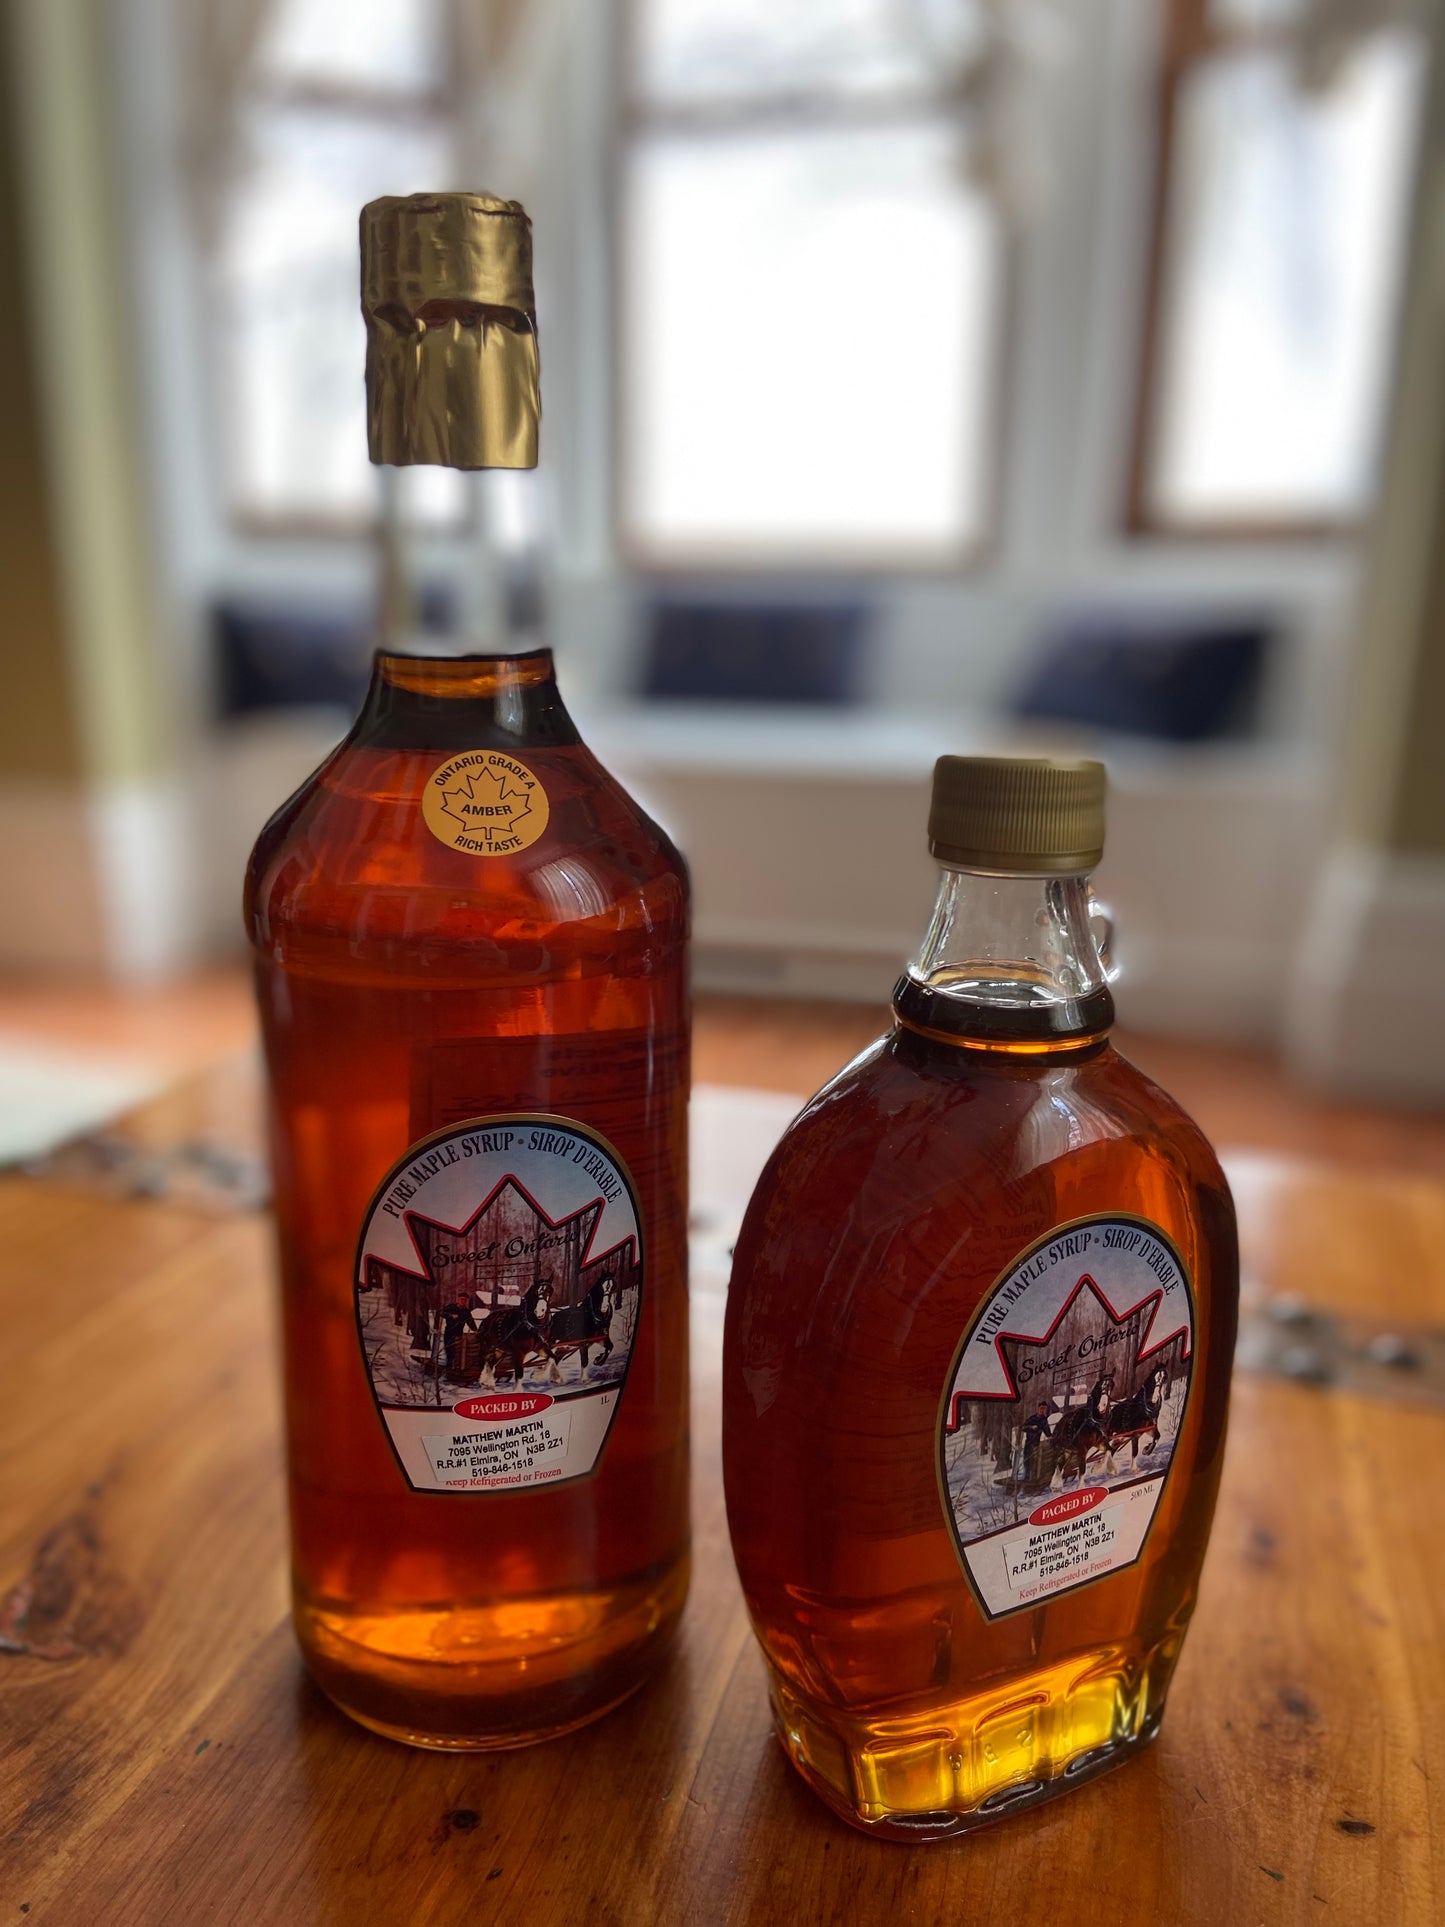 Martin's Maple Syrup